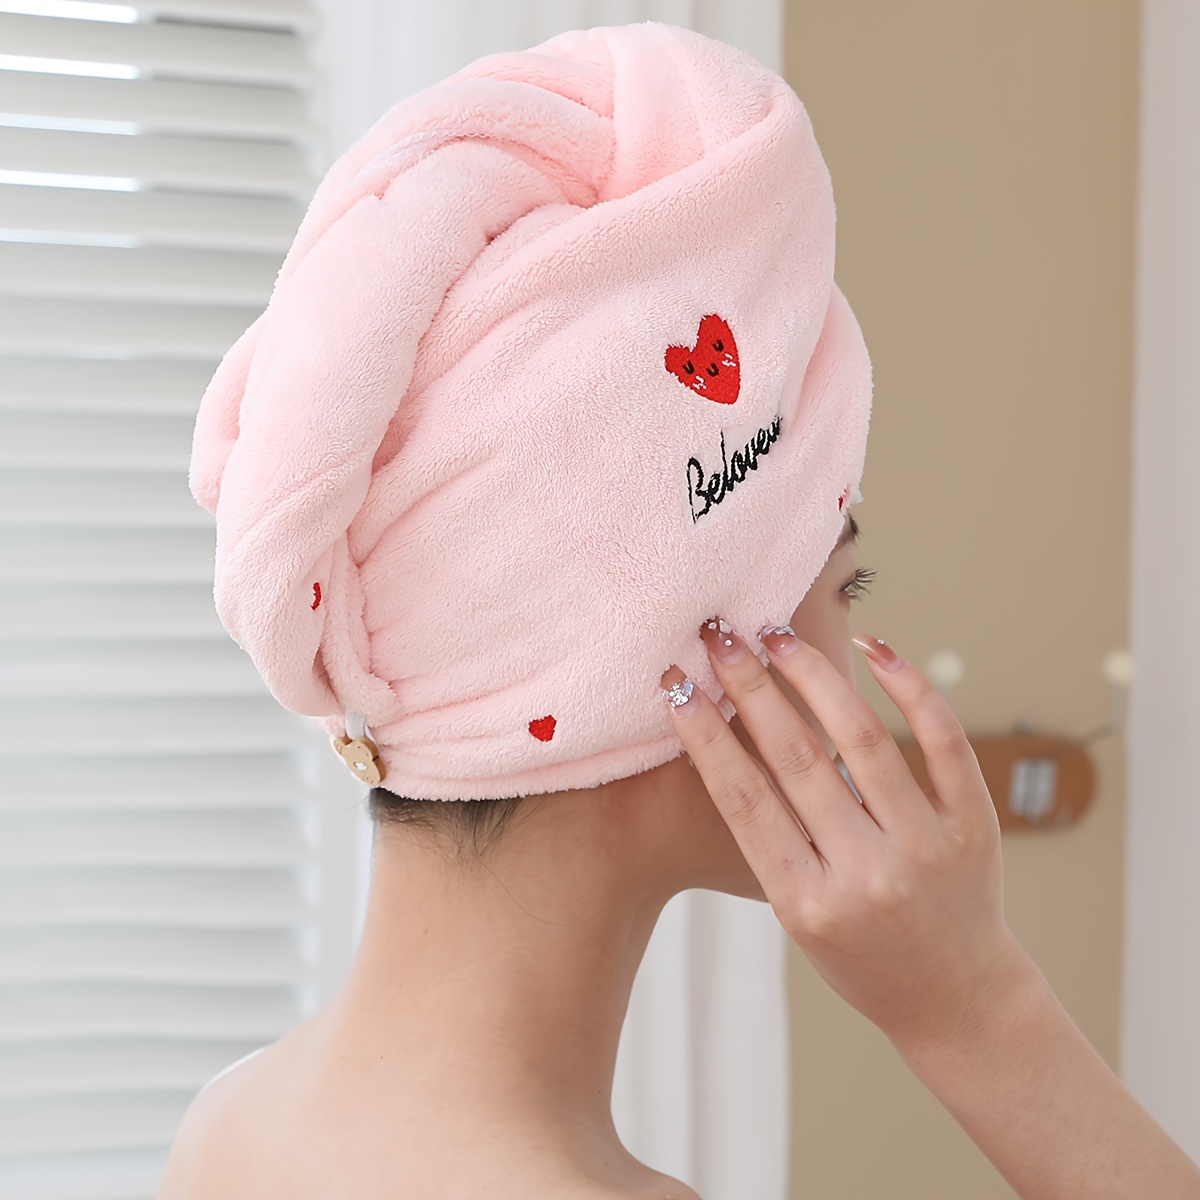 

1pc Heart Embroidered Hair Wrap Towel, Absorbent & Quick-drying Lady's Turban, Super Soft Dry Hair Cap, For Long & Short Hair, Ideal Bathroom Supplies